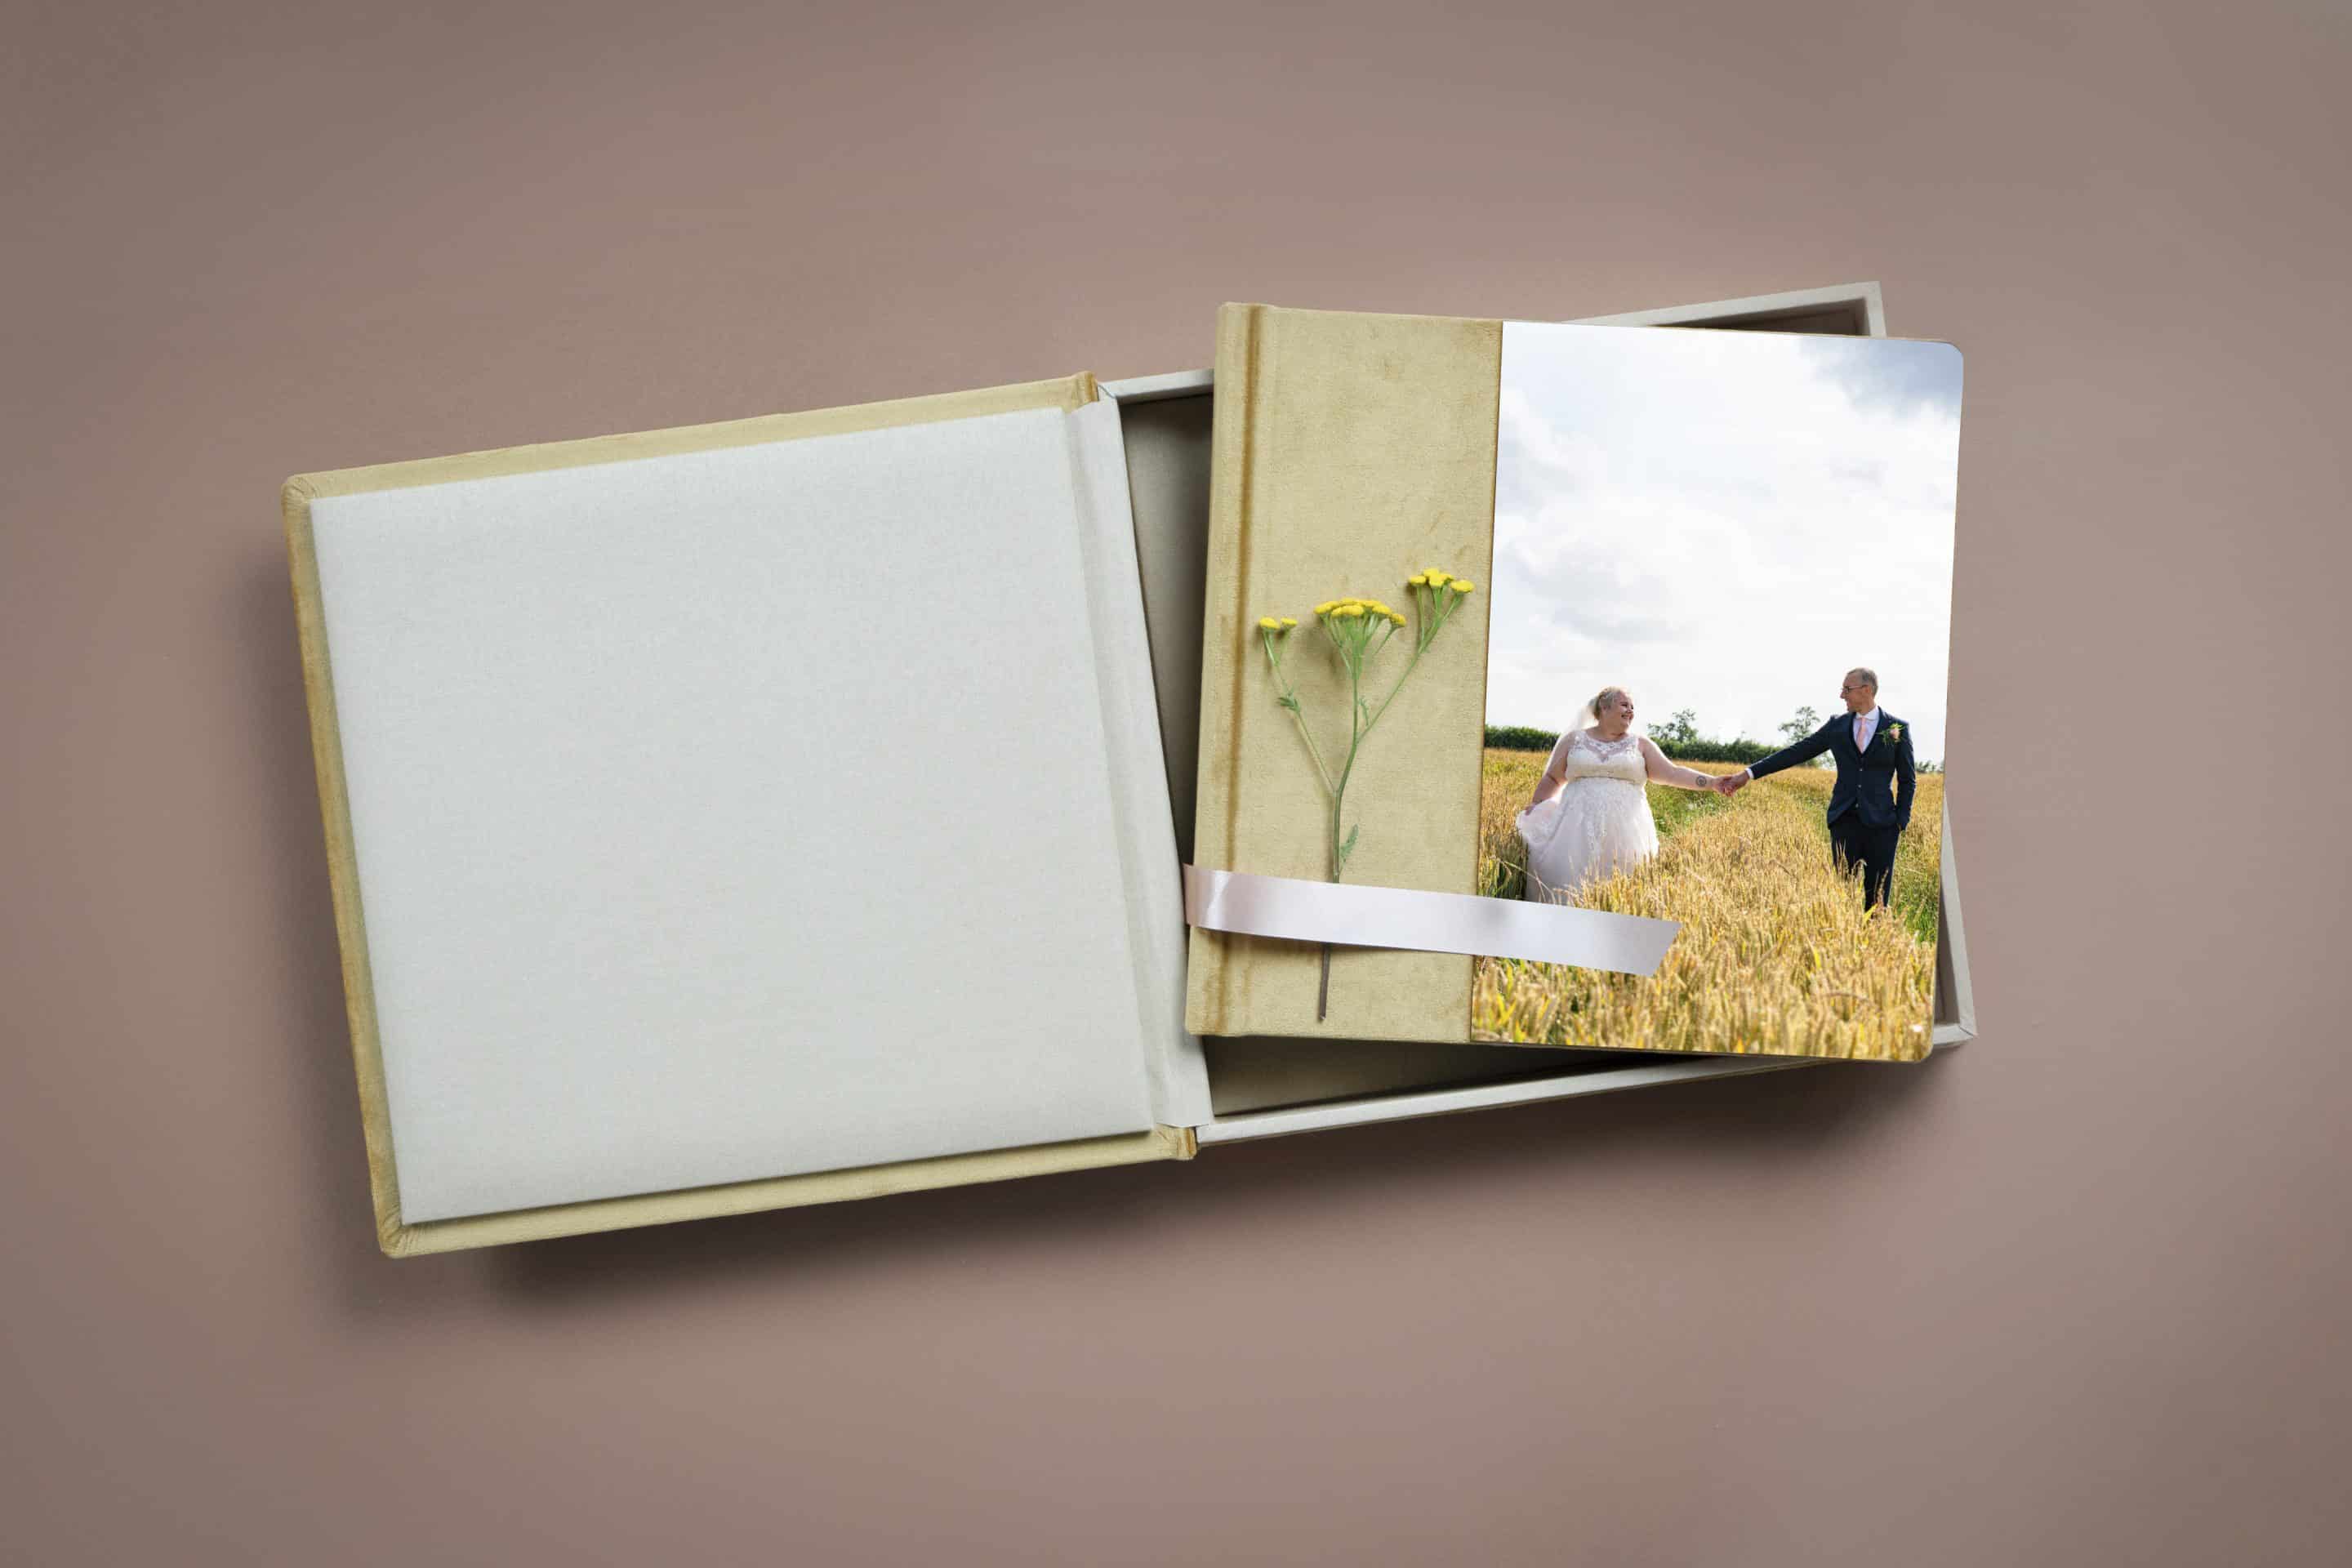 A blue wedding album with an acrylic front